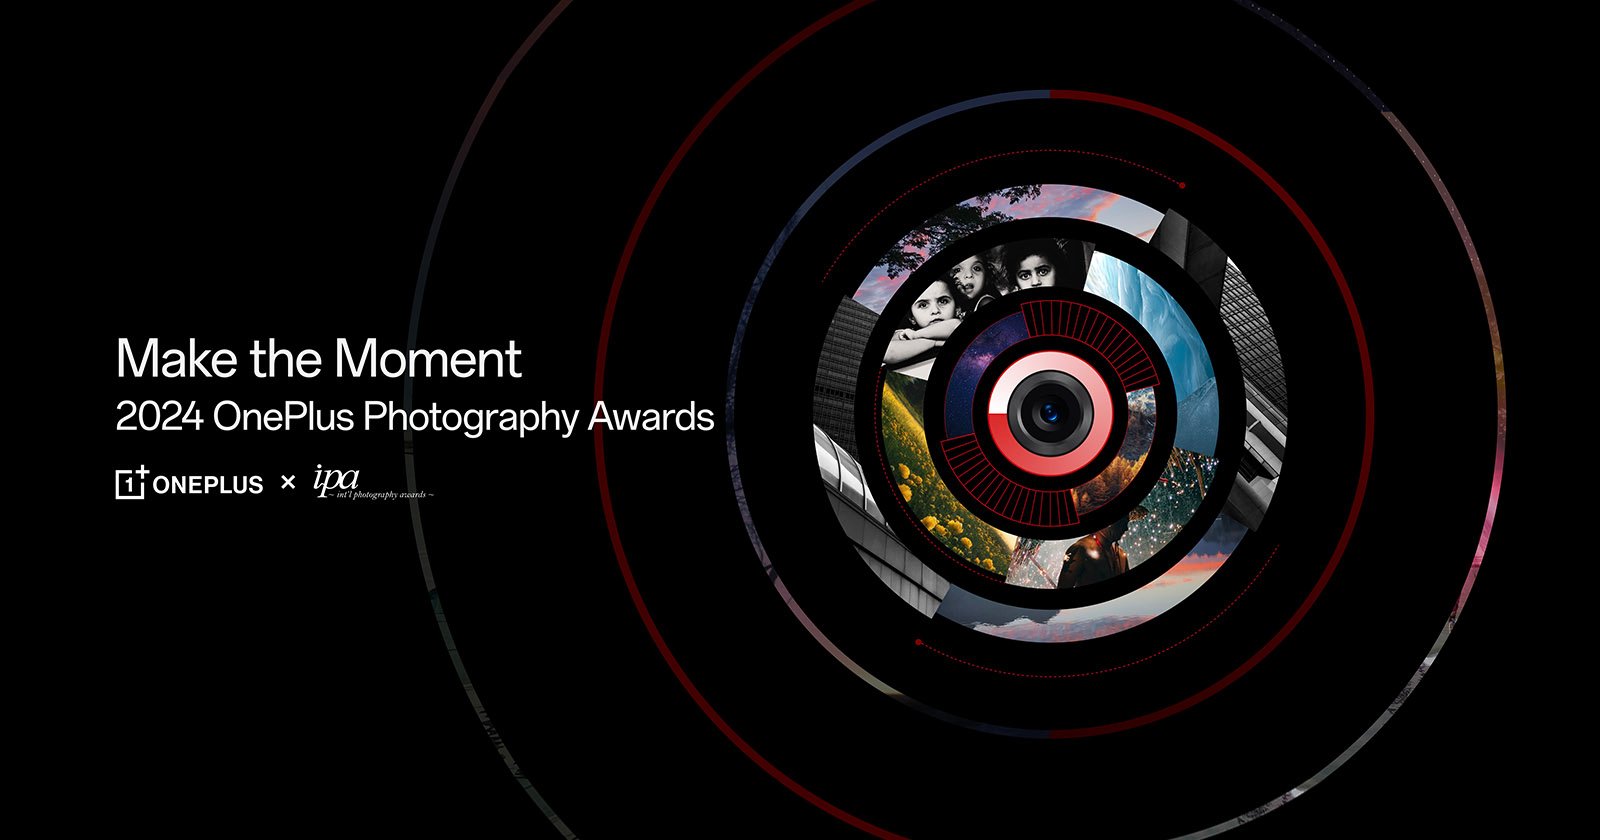 The 2024 OnePlus Photography Awards Are Open for Entries